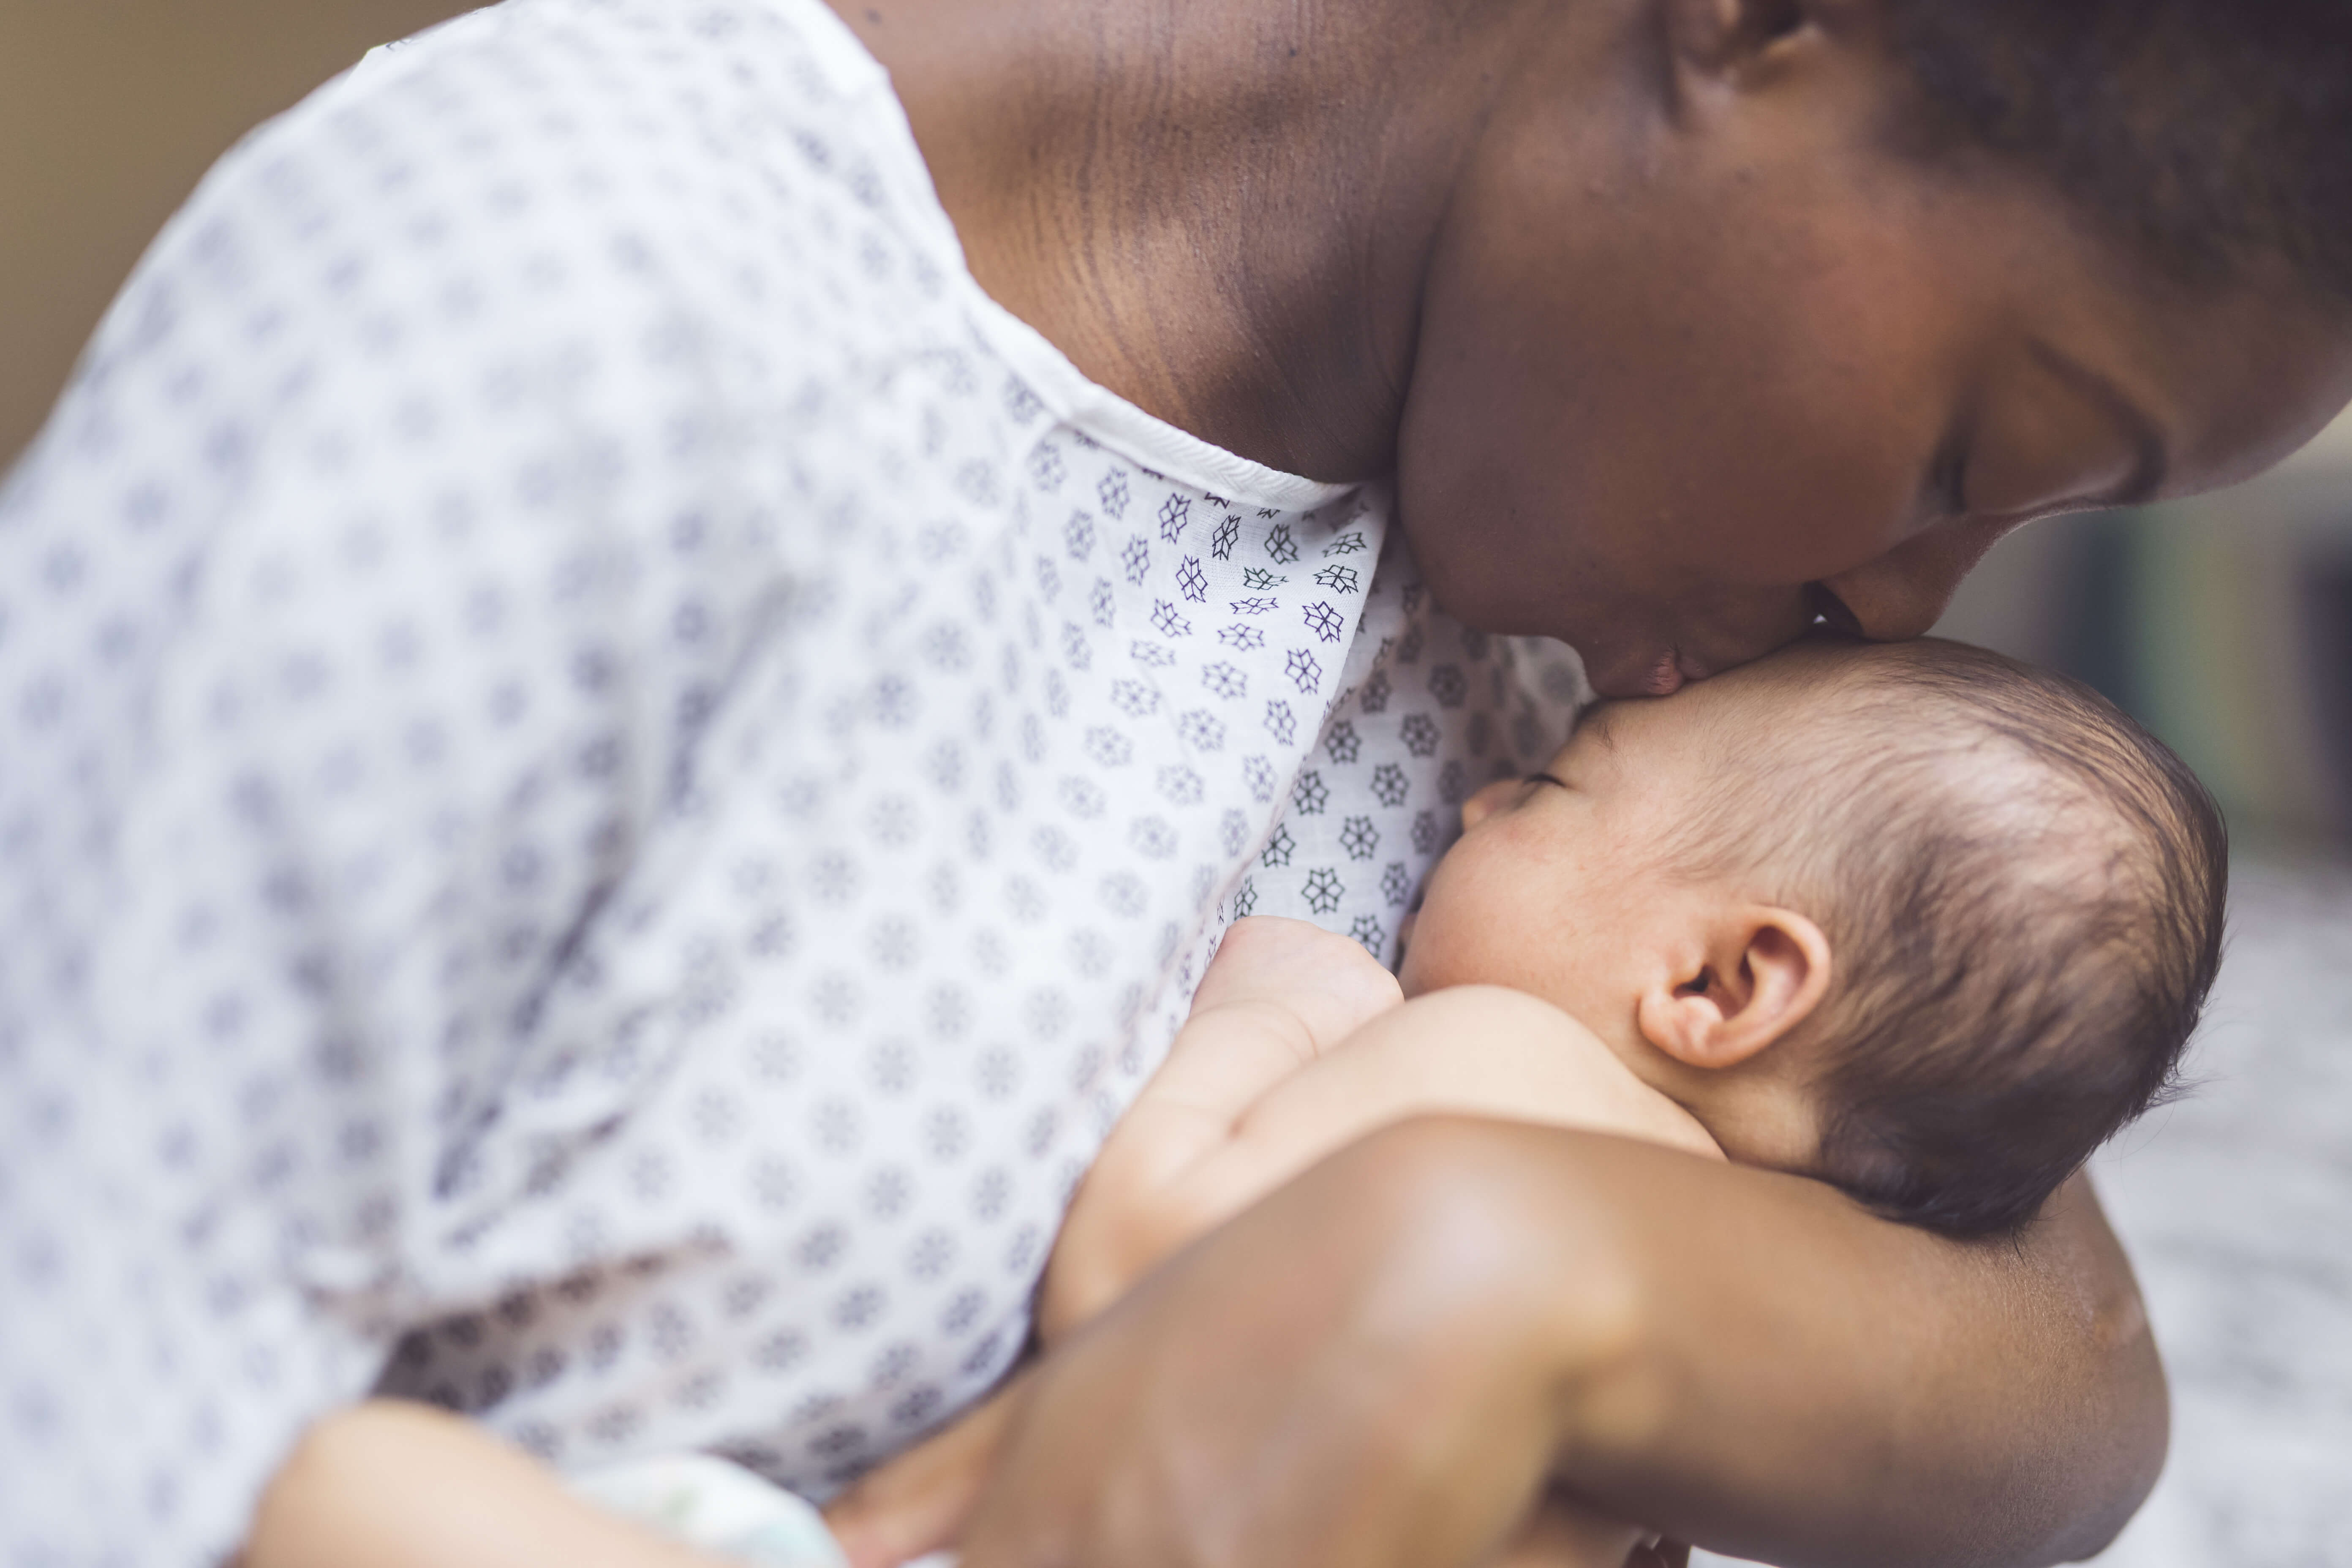 A beautiful young African American mother in a hospital gown gently holds her infant in her arms and smiles down at her. The baby's eyes are closed.